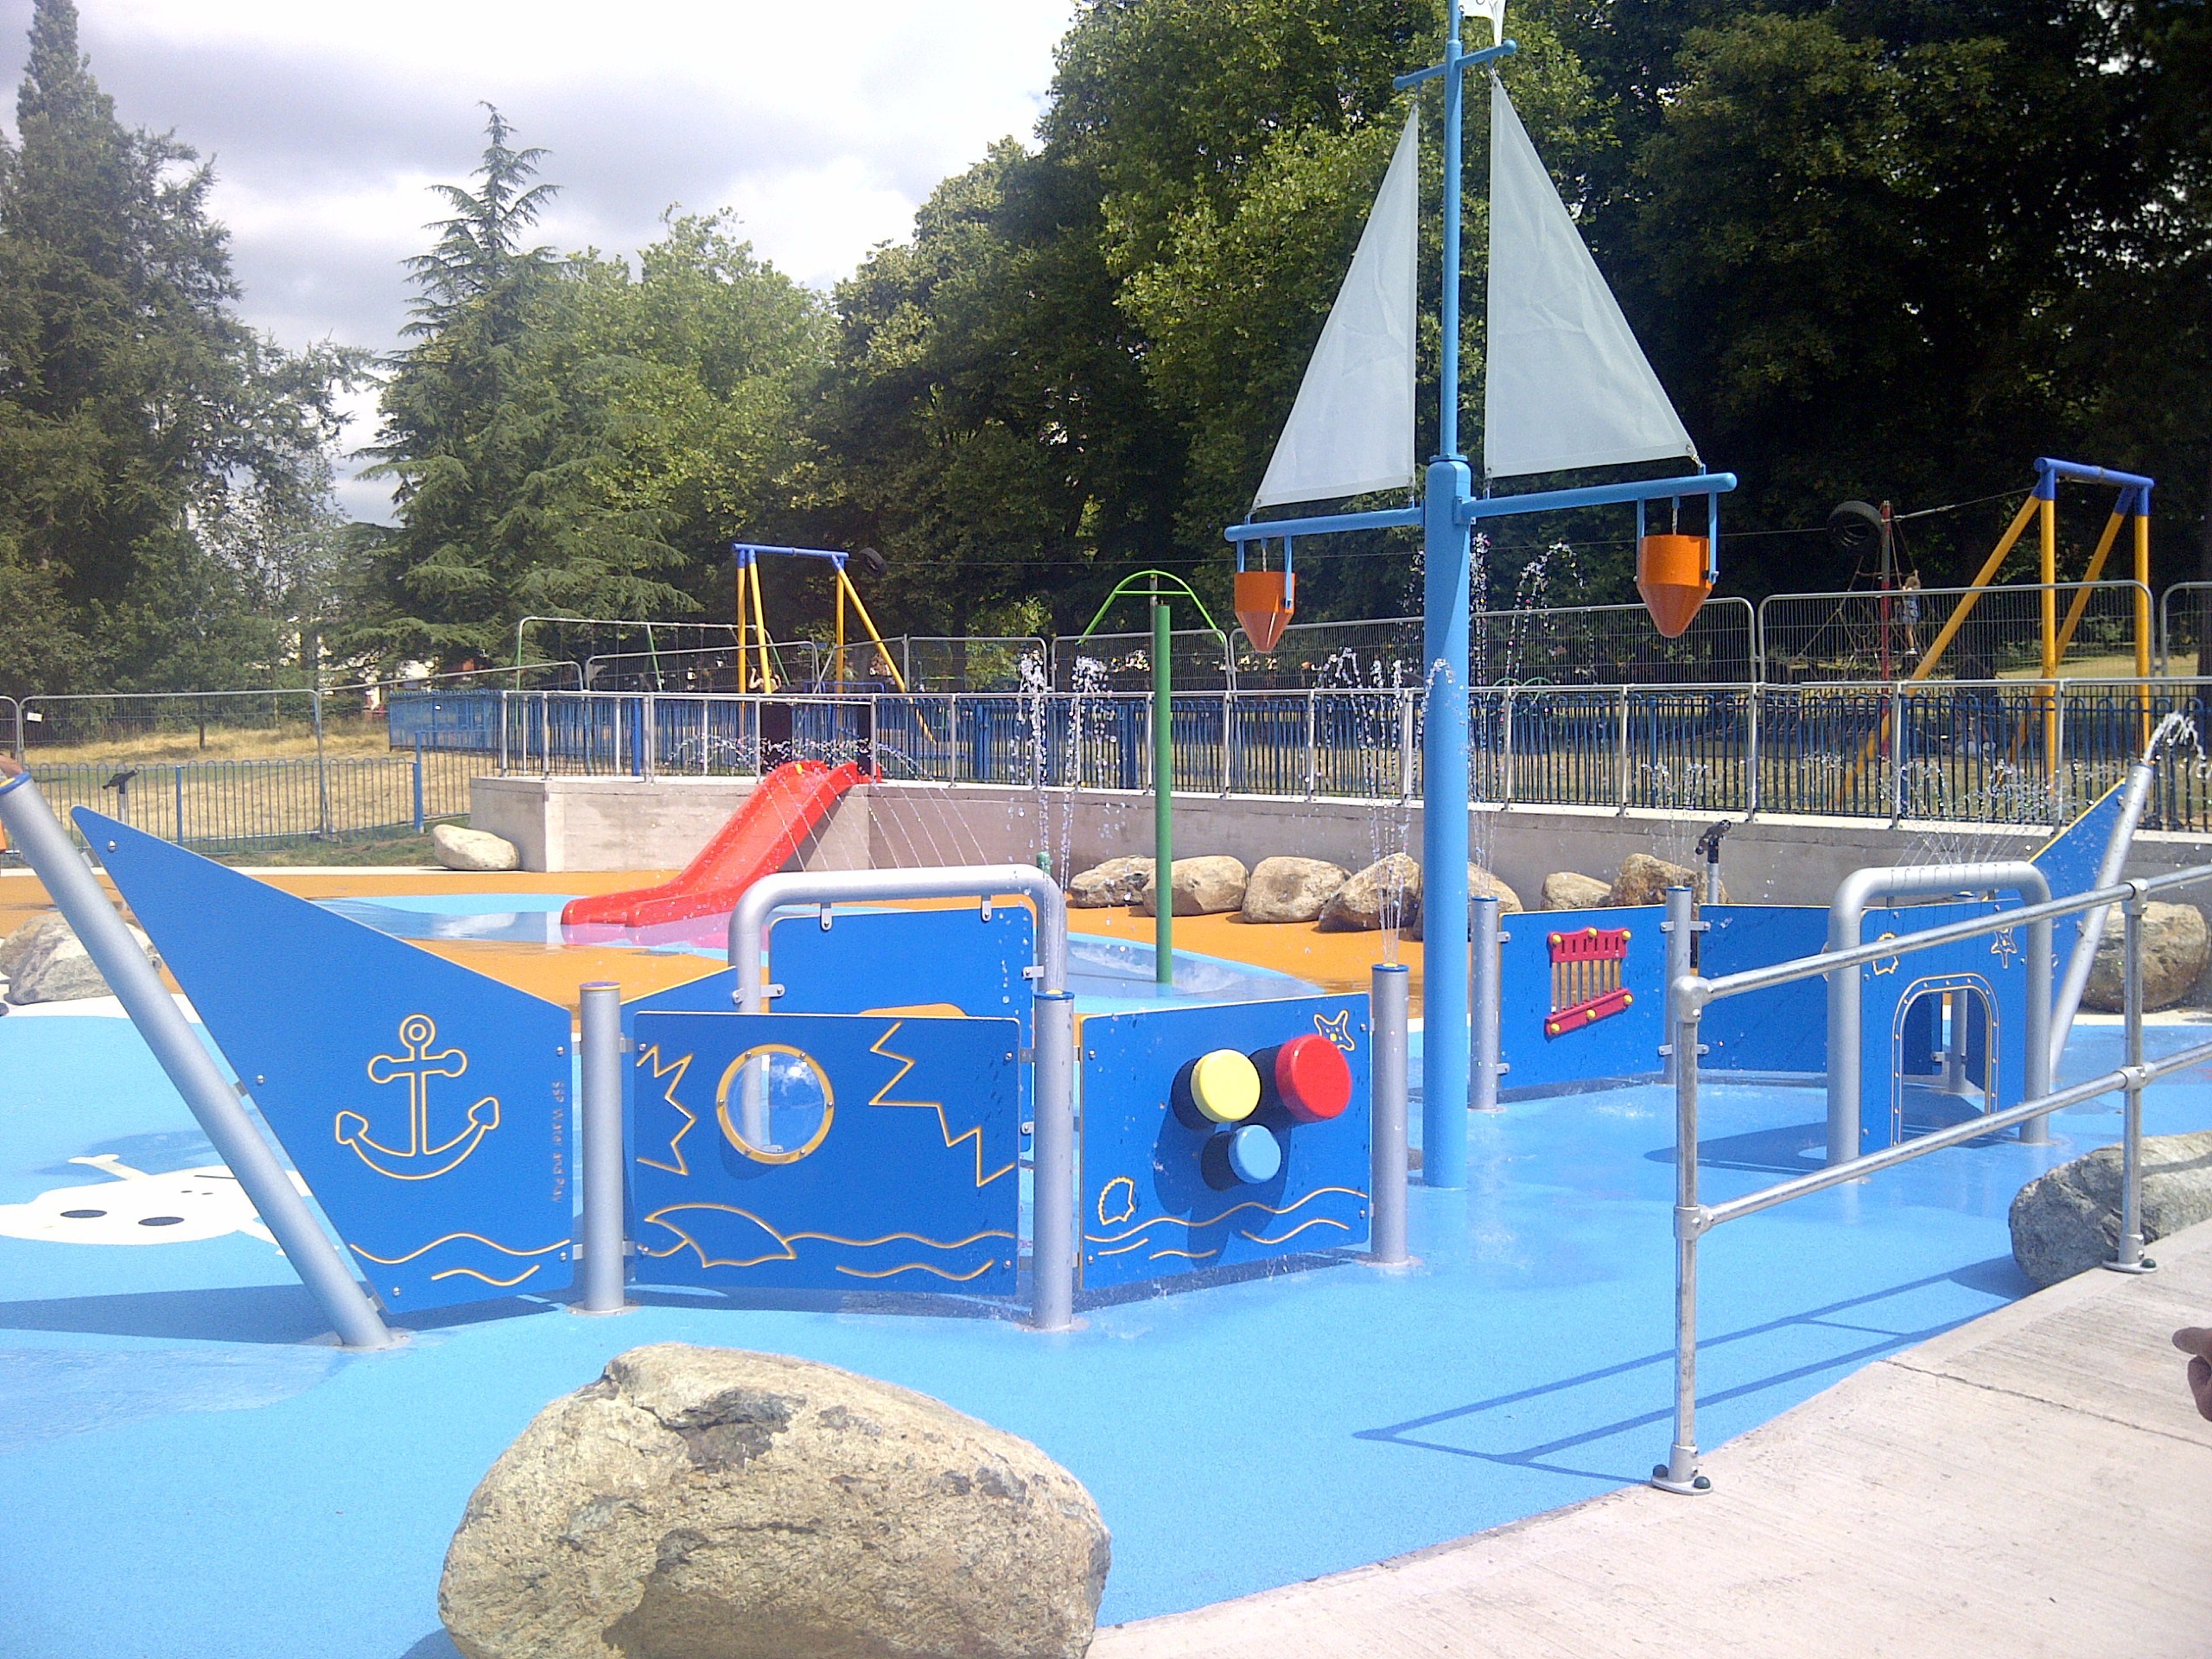 blue floored waterplay area with various sprinklers and water jets some forming a pirate ship shape